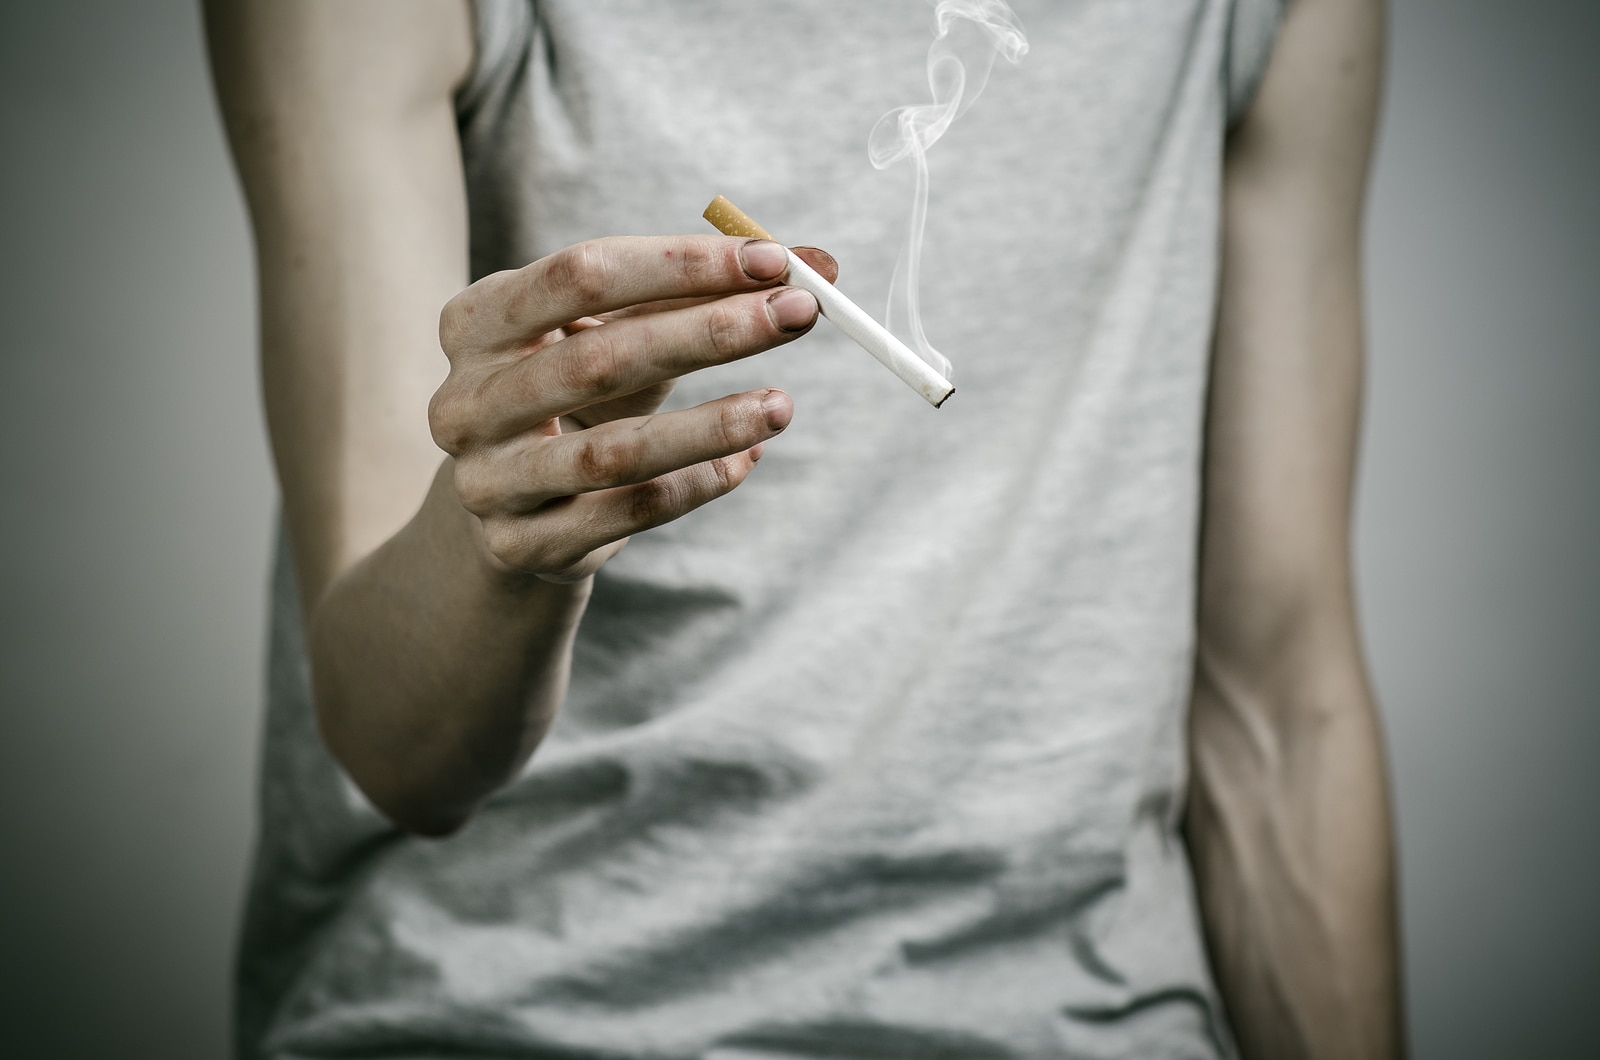 Cigarettes, Addiction And Public Health Topic: Smoker Holds The